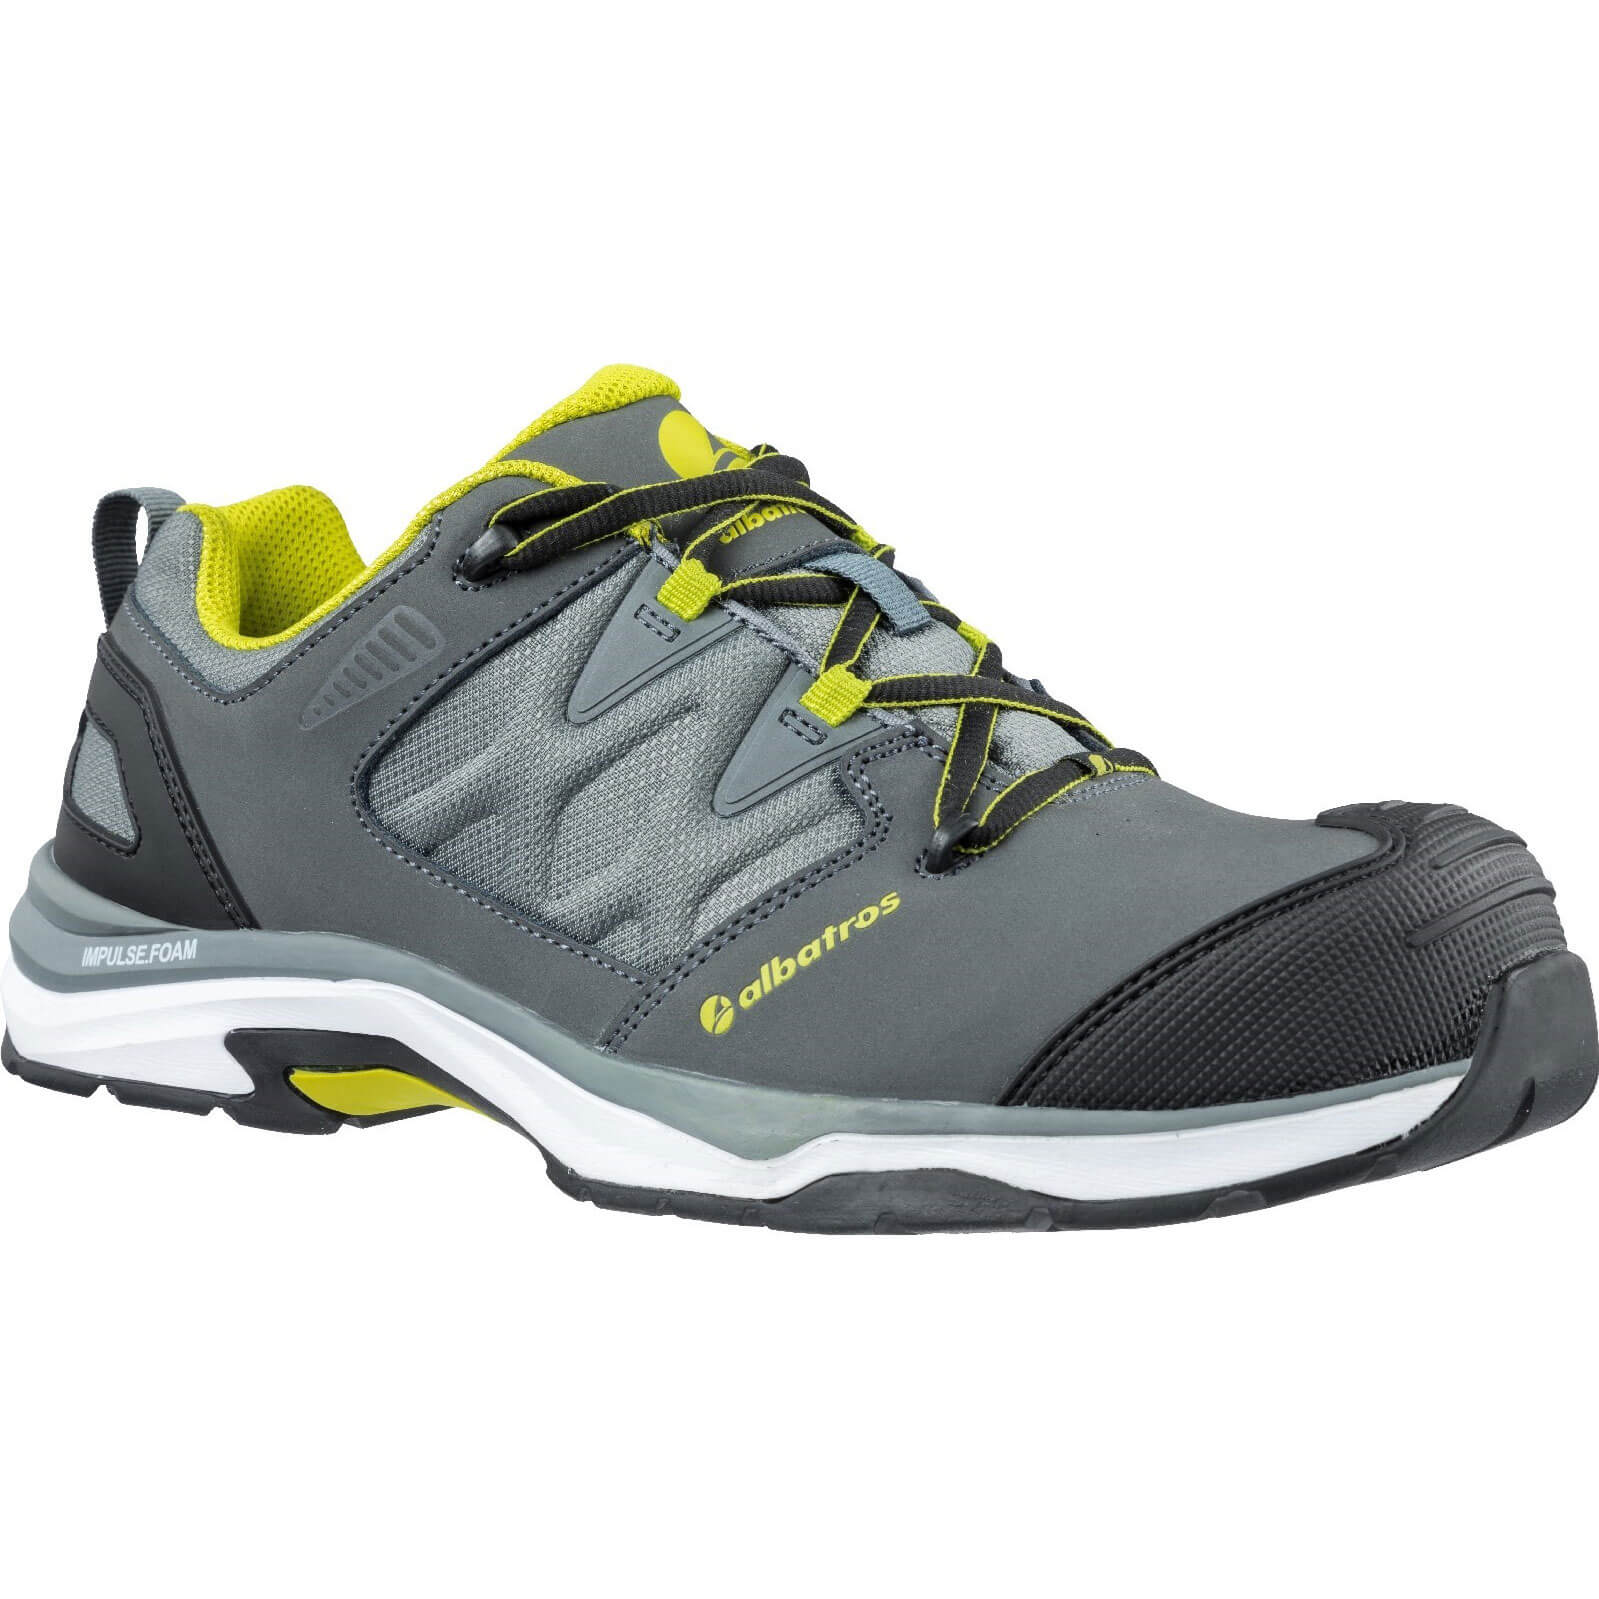 Image of Albatros Ultratrail Low Lace Up Safety Shoe Grey Size 5